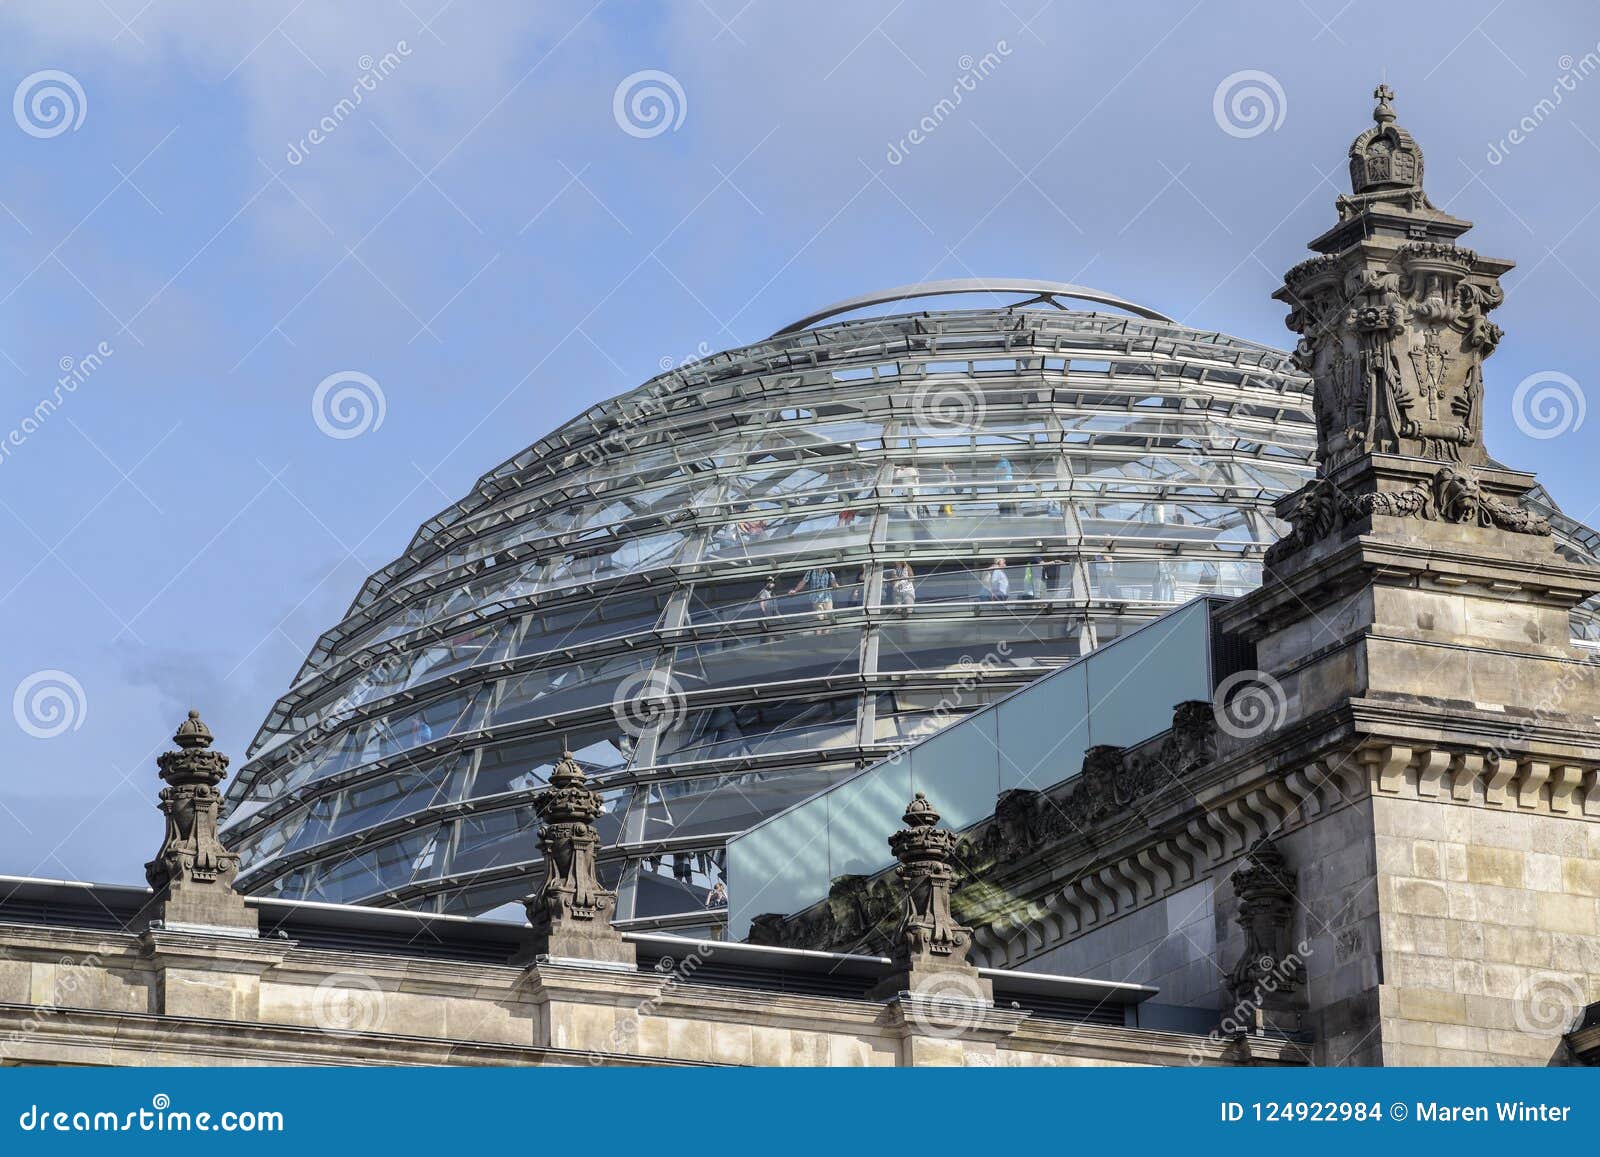 dome of the reichstag building german goverment in berlin the